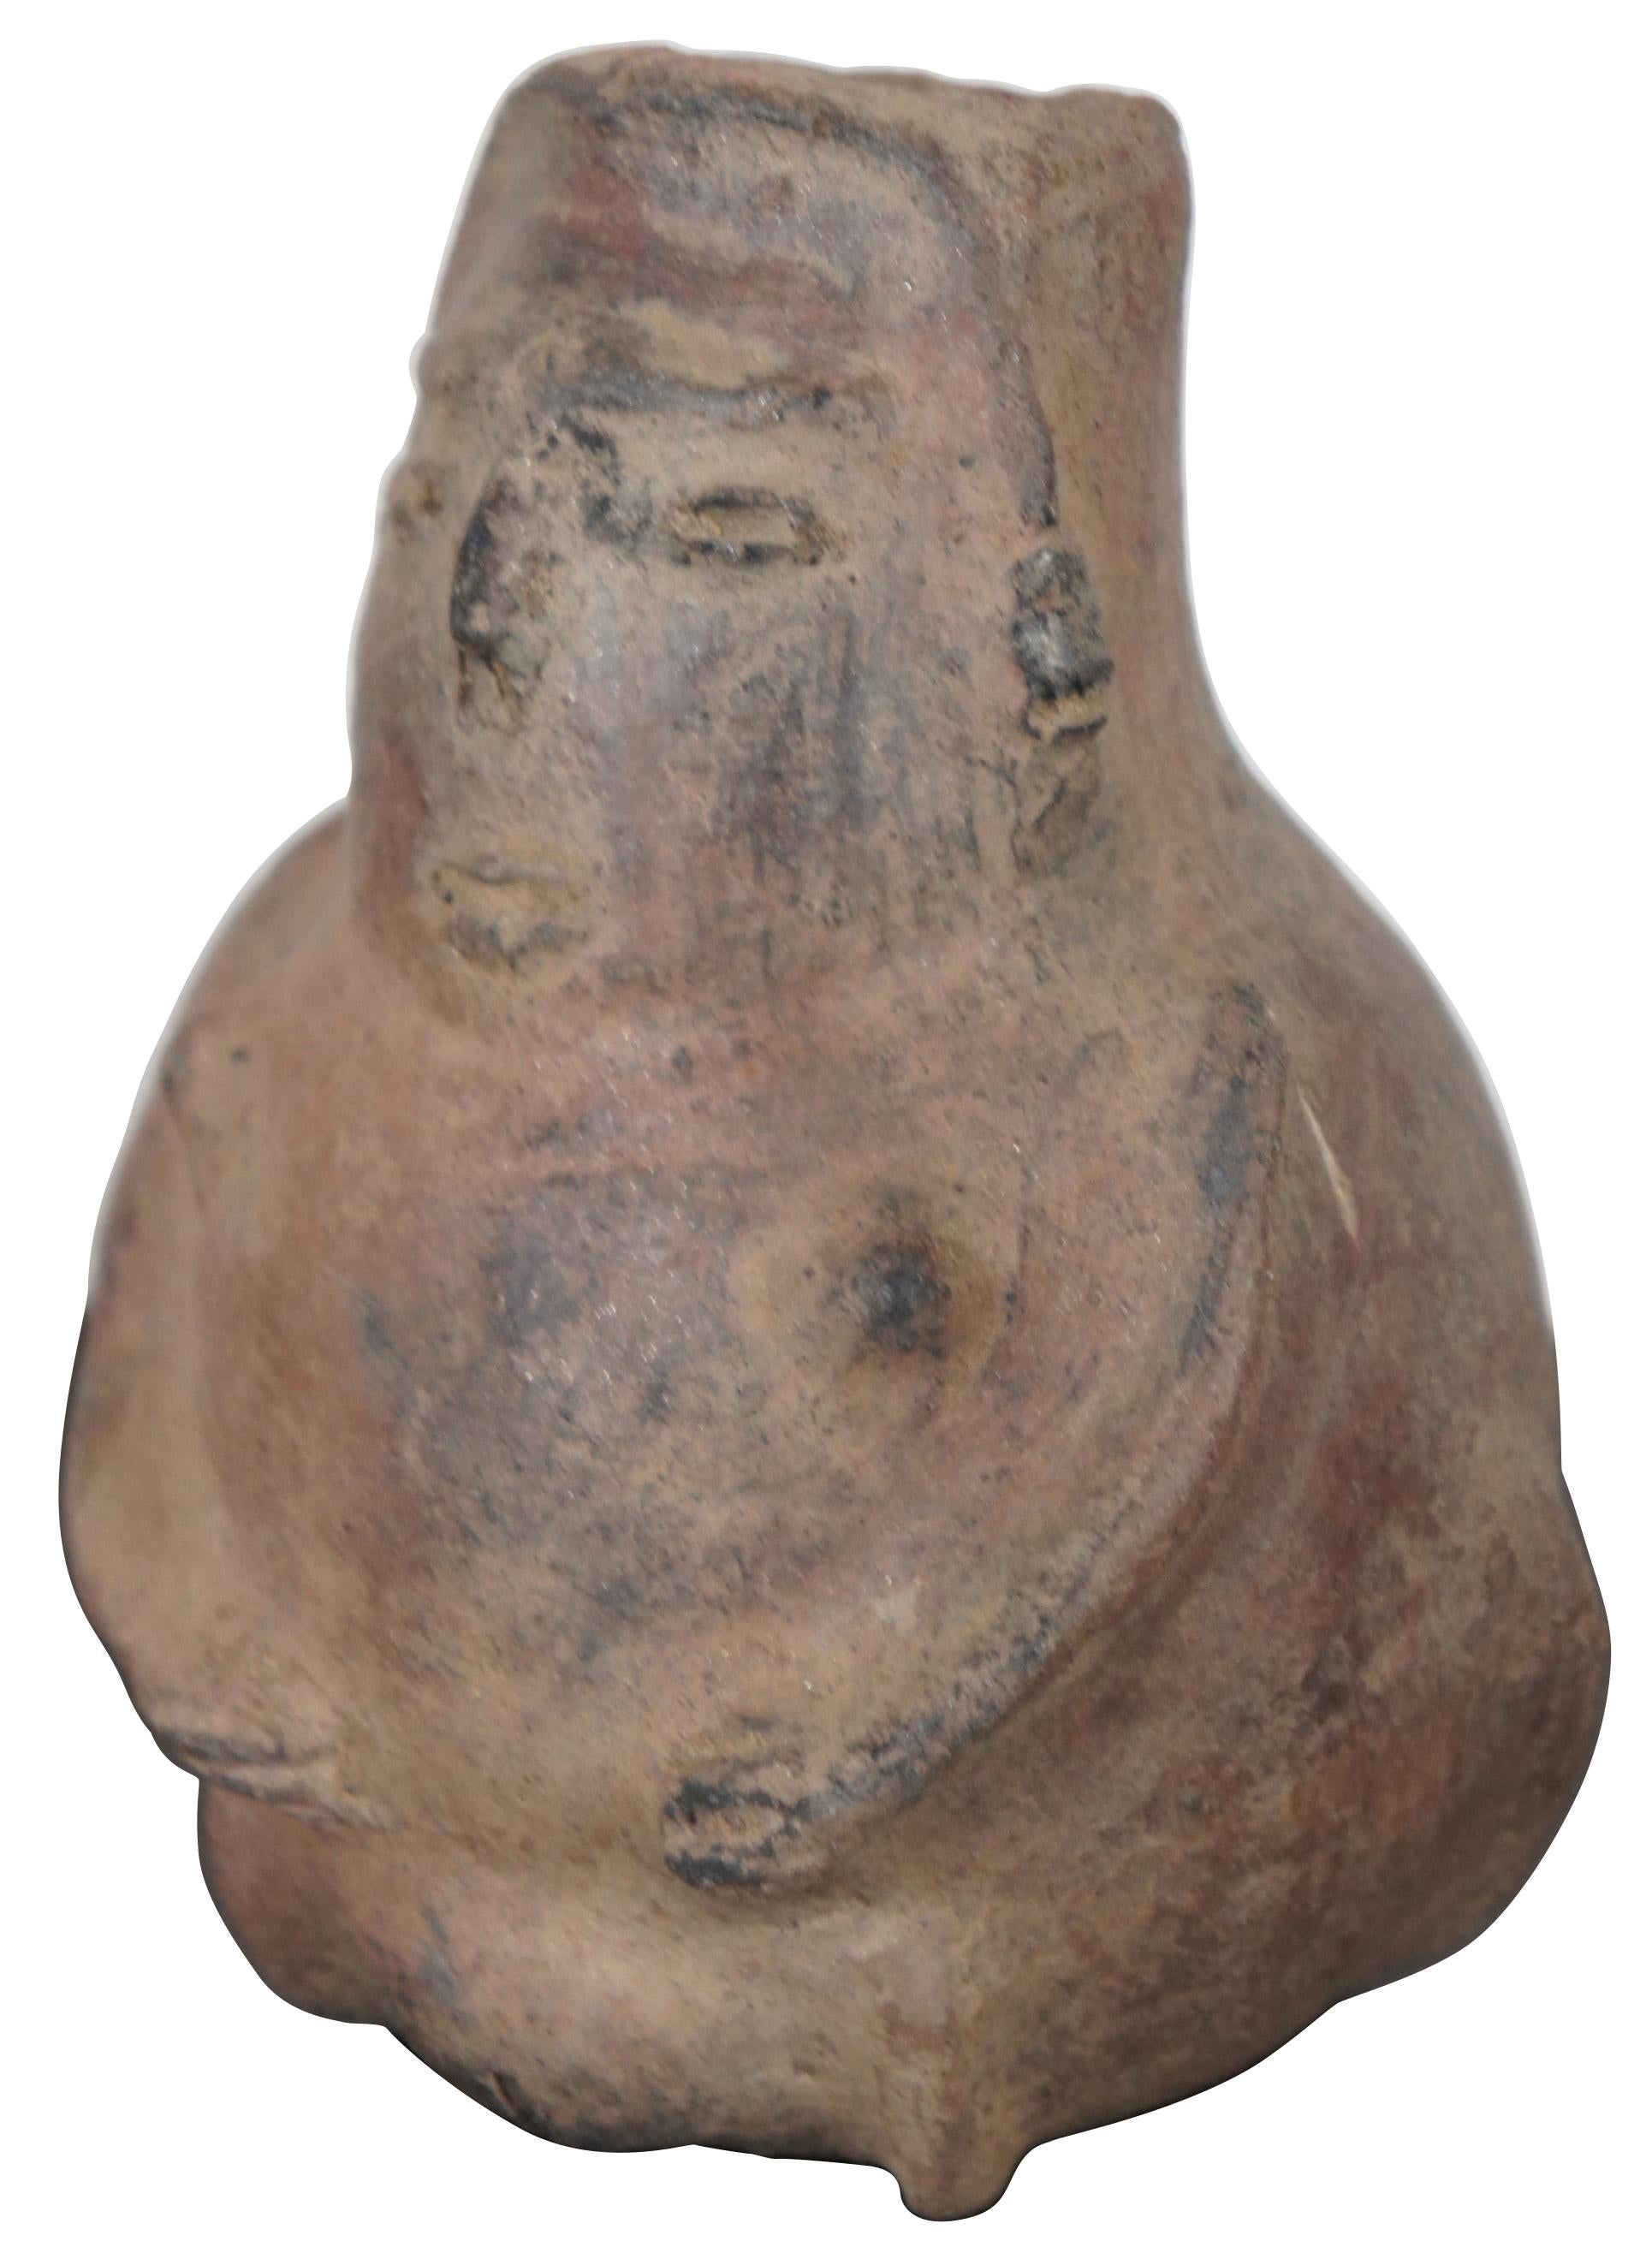 Antique Pre Columbian primitive earthenware Effigy bud vase or vessel in the shape of a female figure featuring pointed breasts and a distinctly feminine pubic mound. Measures: 6”.
 